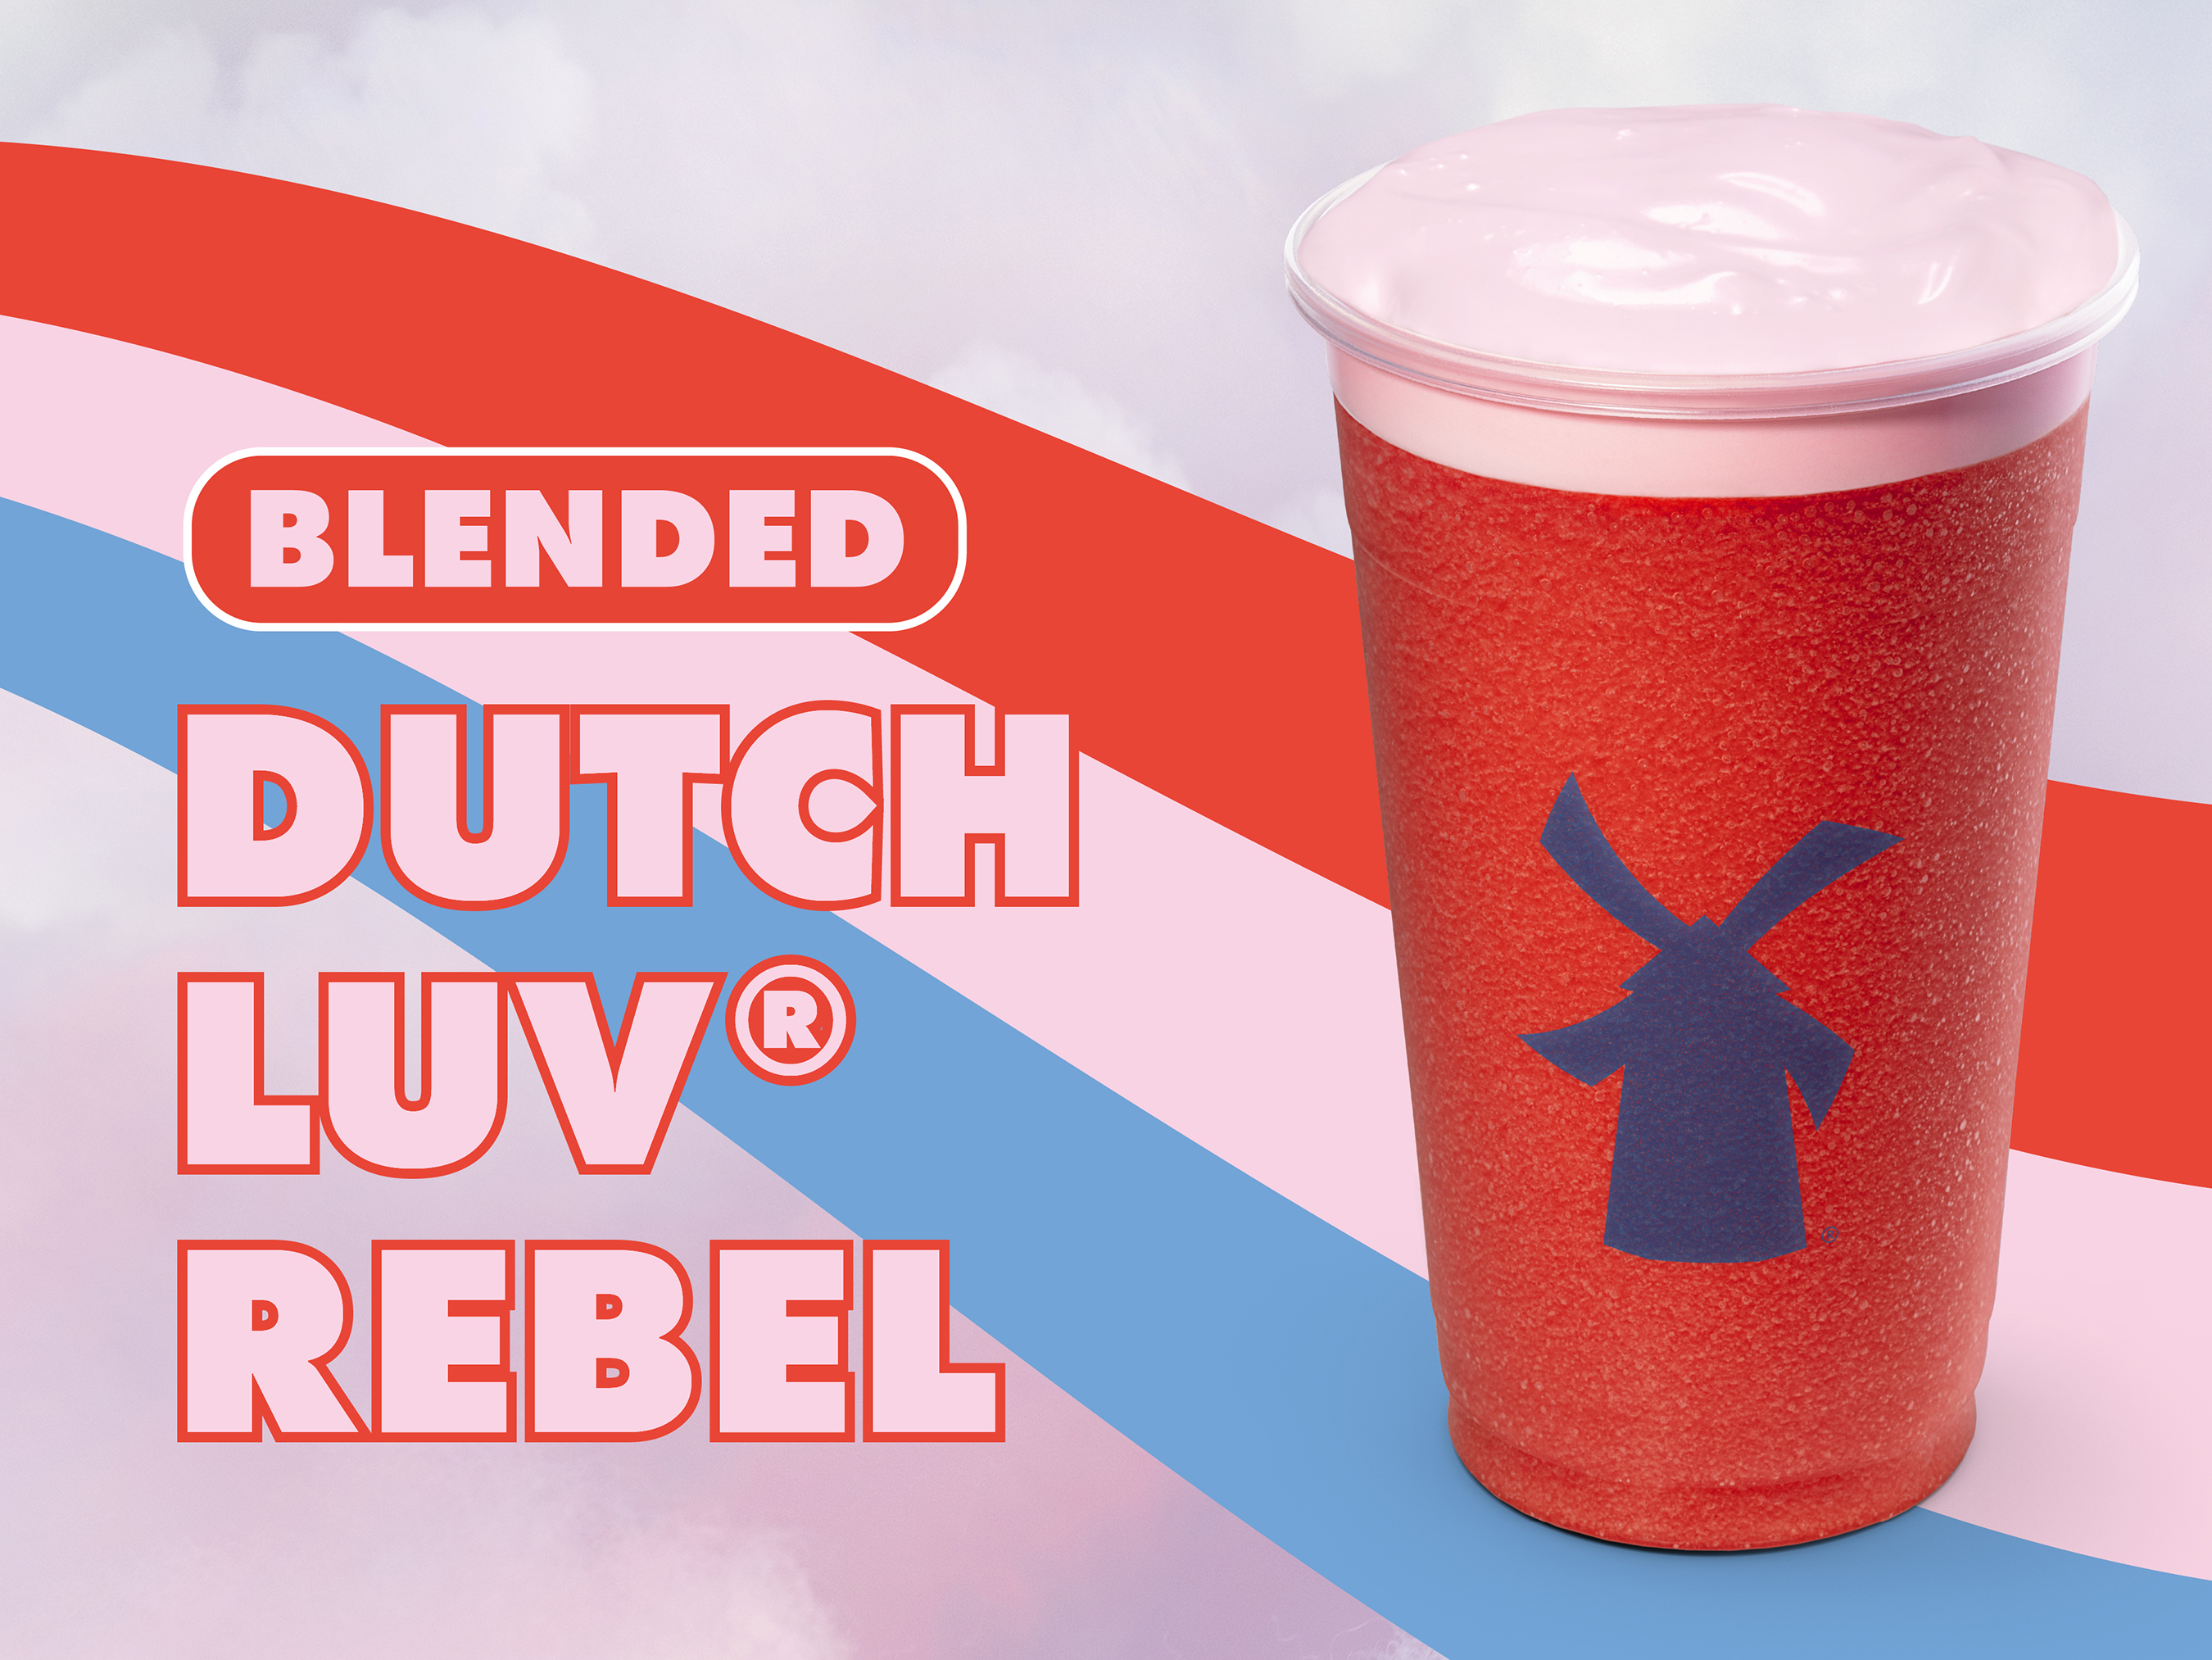 Dutch Luv Rebel: The Dutch Luv Rebel features a blended Rebel energy drink infused with berry flavor topped with pink Soft Top